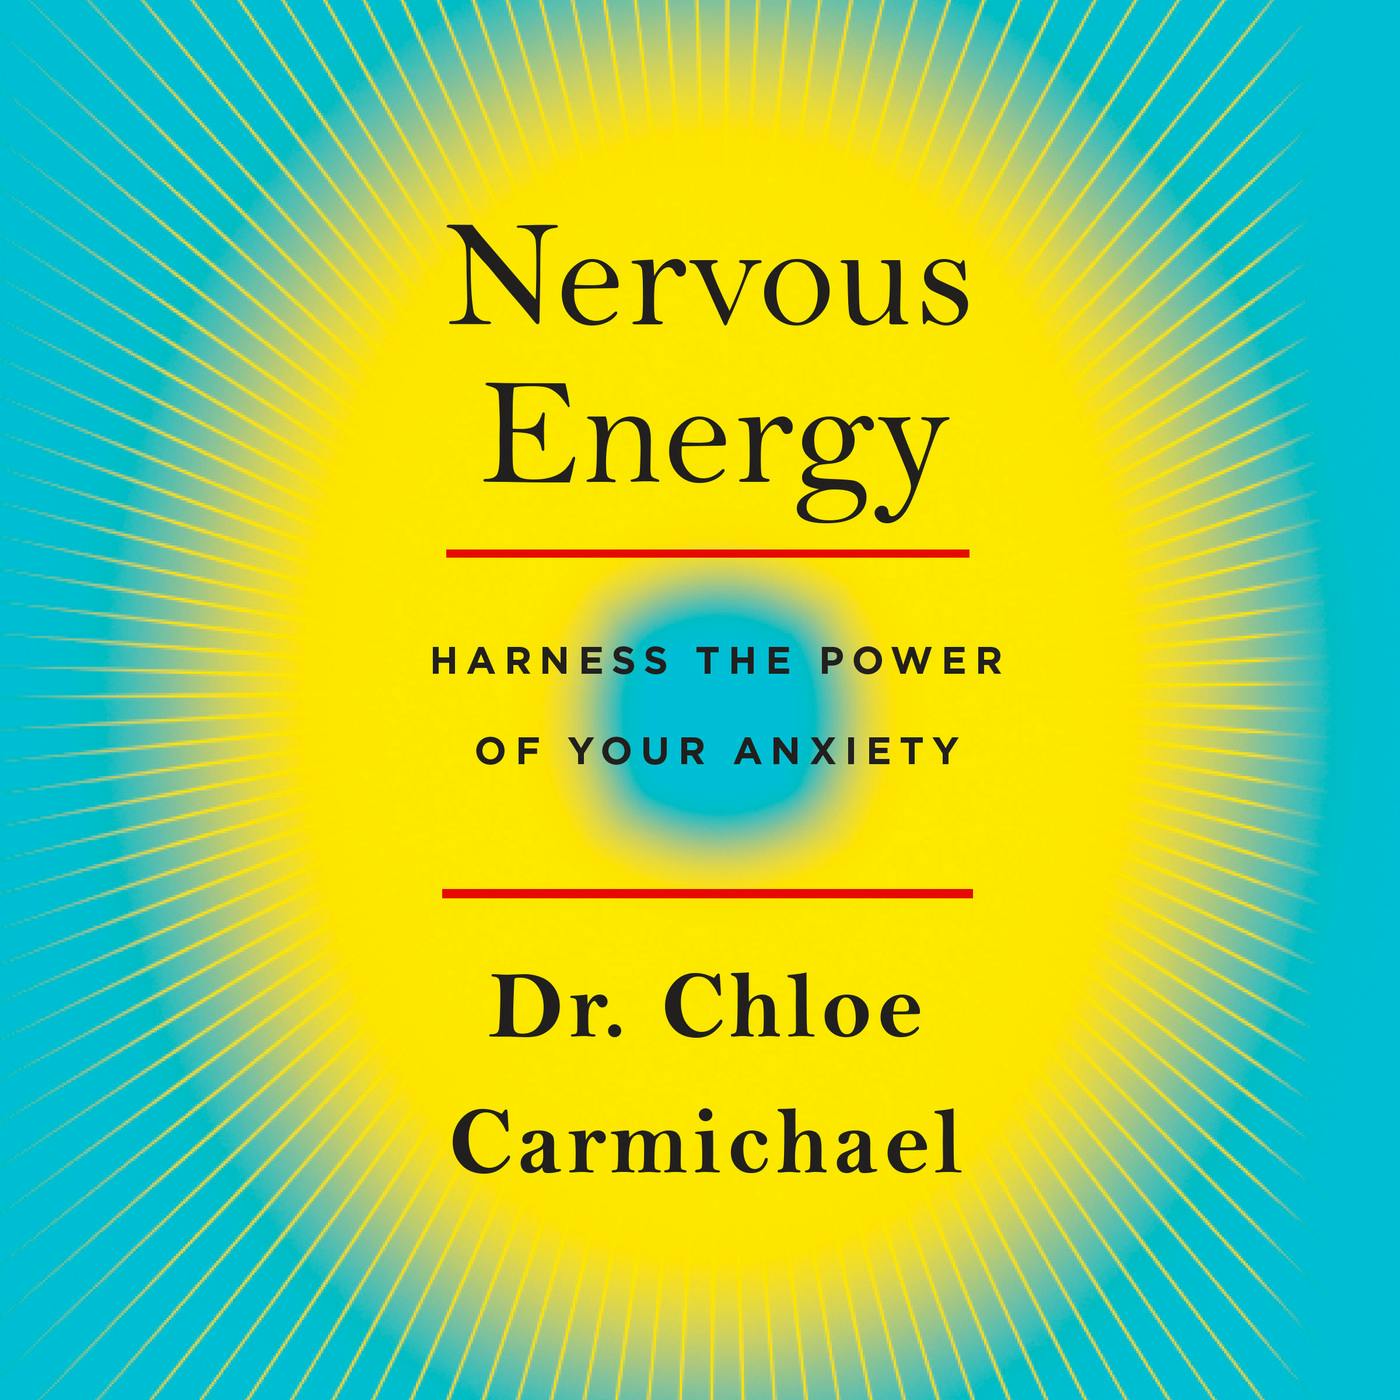 Nervous Energy - Harness the Power of Your Anxiety (Unabridged) - Dr. Chloe Carmichael